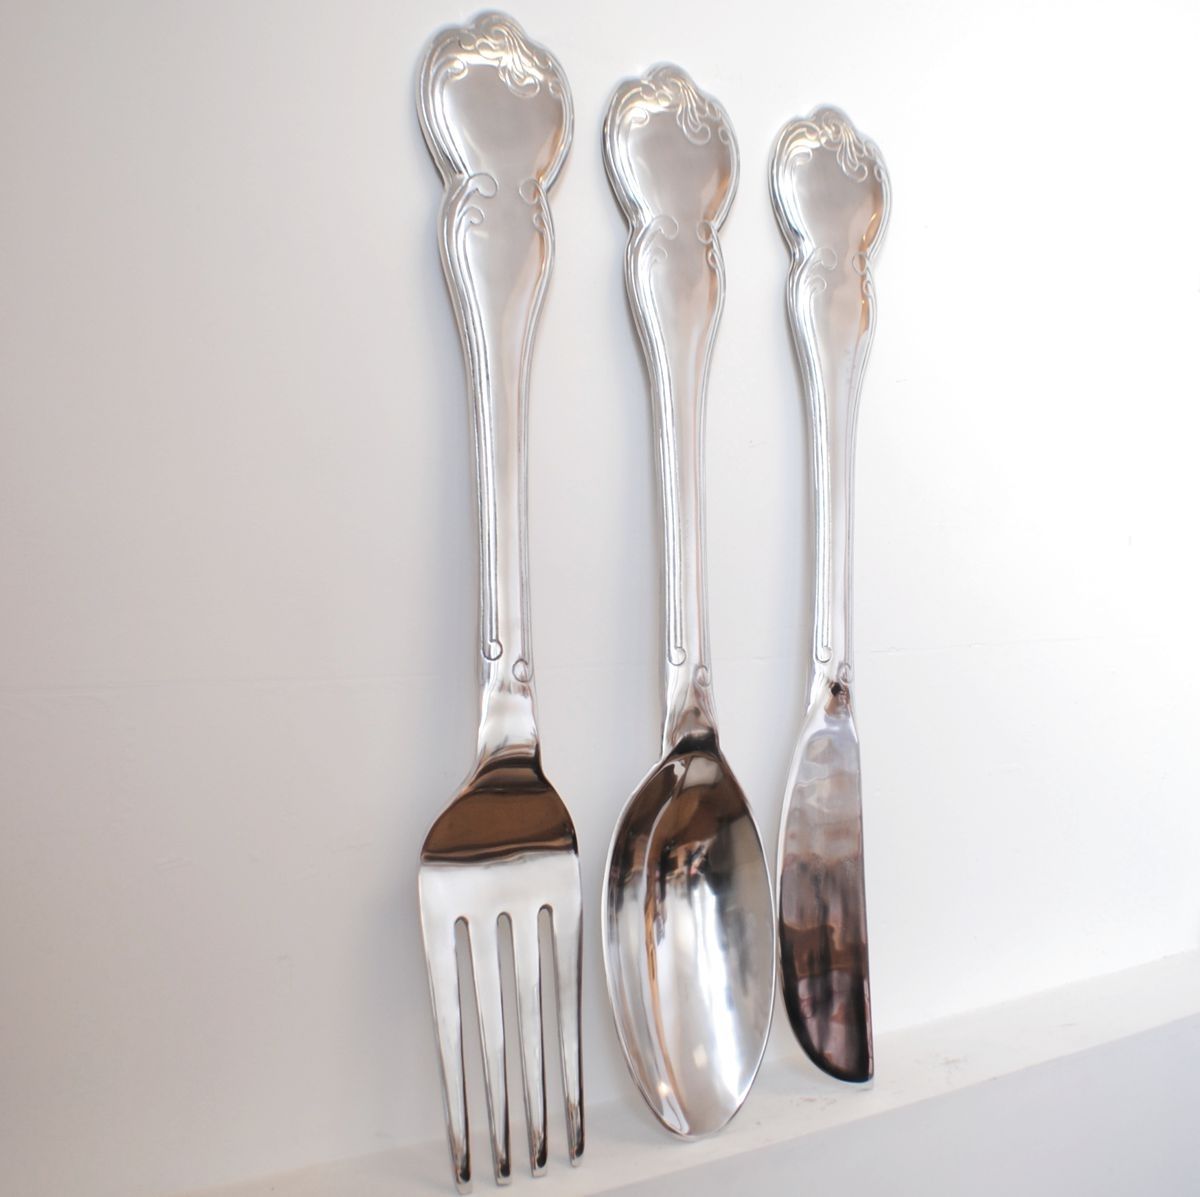 Large Utensil Wall Art With Regard To Newest Large Kitchen Utensil Wall Decor • Walls Decor (View 2 of 15)